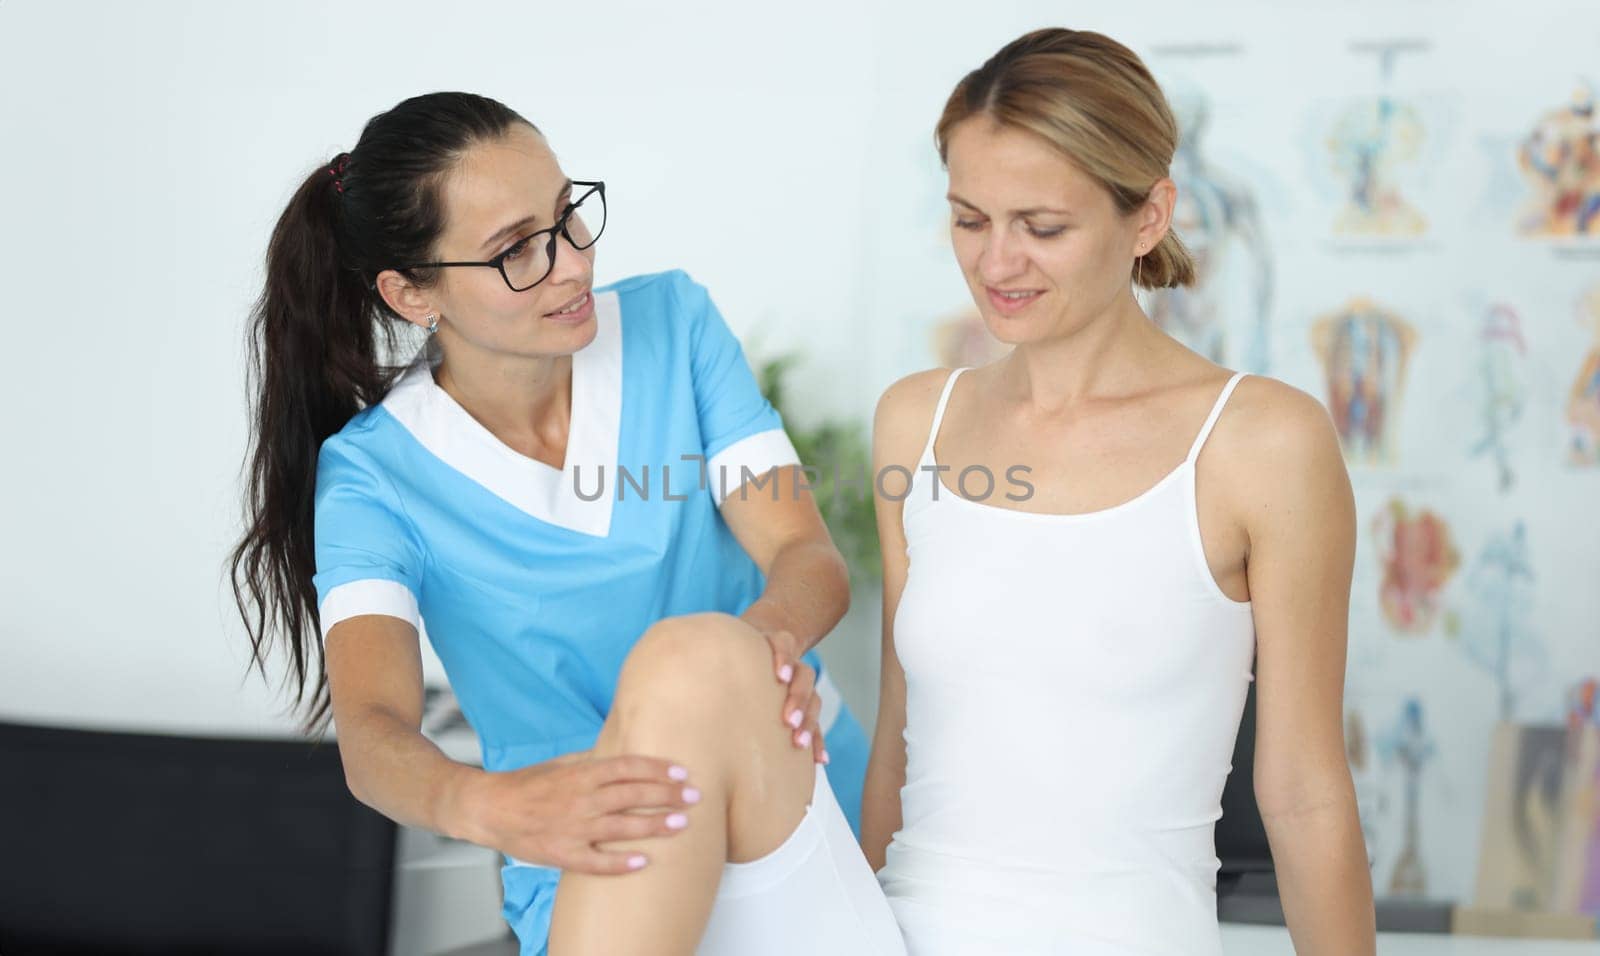 Female patient receiving medical care in rehabilitation center after leg injury. Physiotherapist examining leg and knee of woman sitting on medical couch